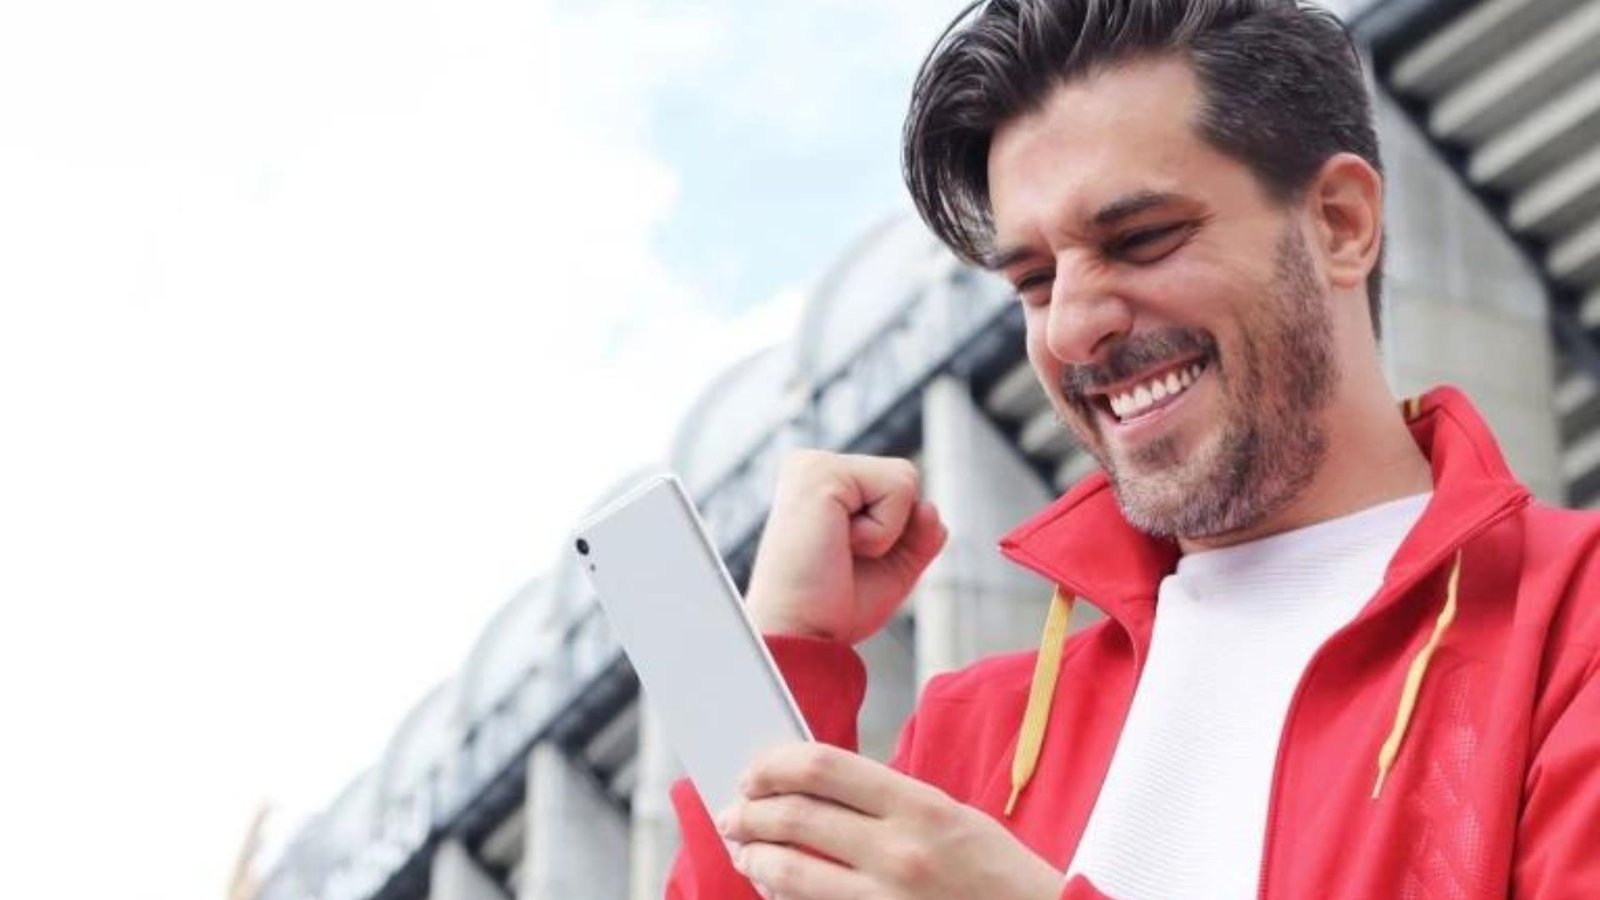 A Man Wearing a Red Jacket and White Shirt Holding a Phone 